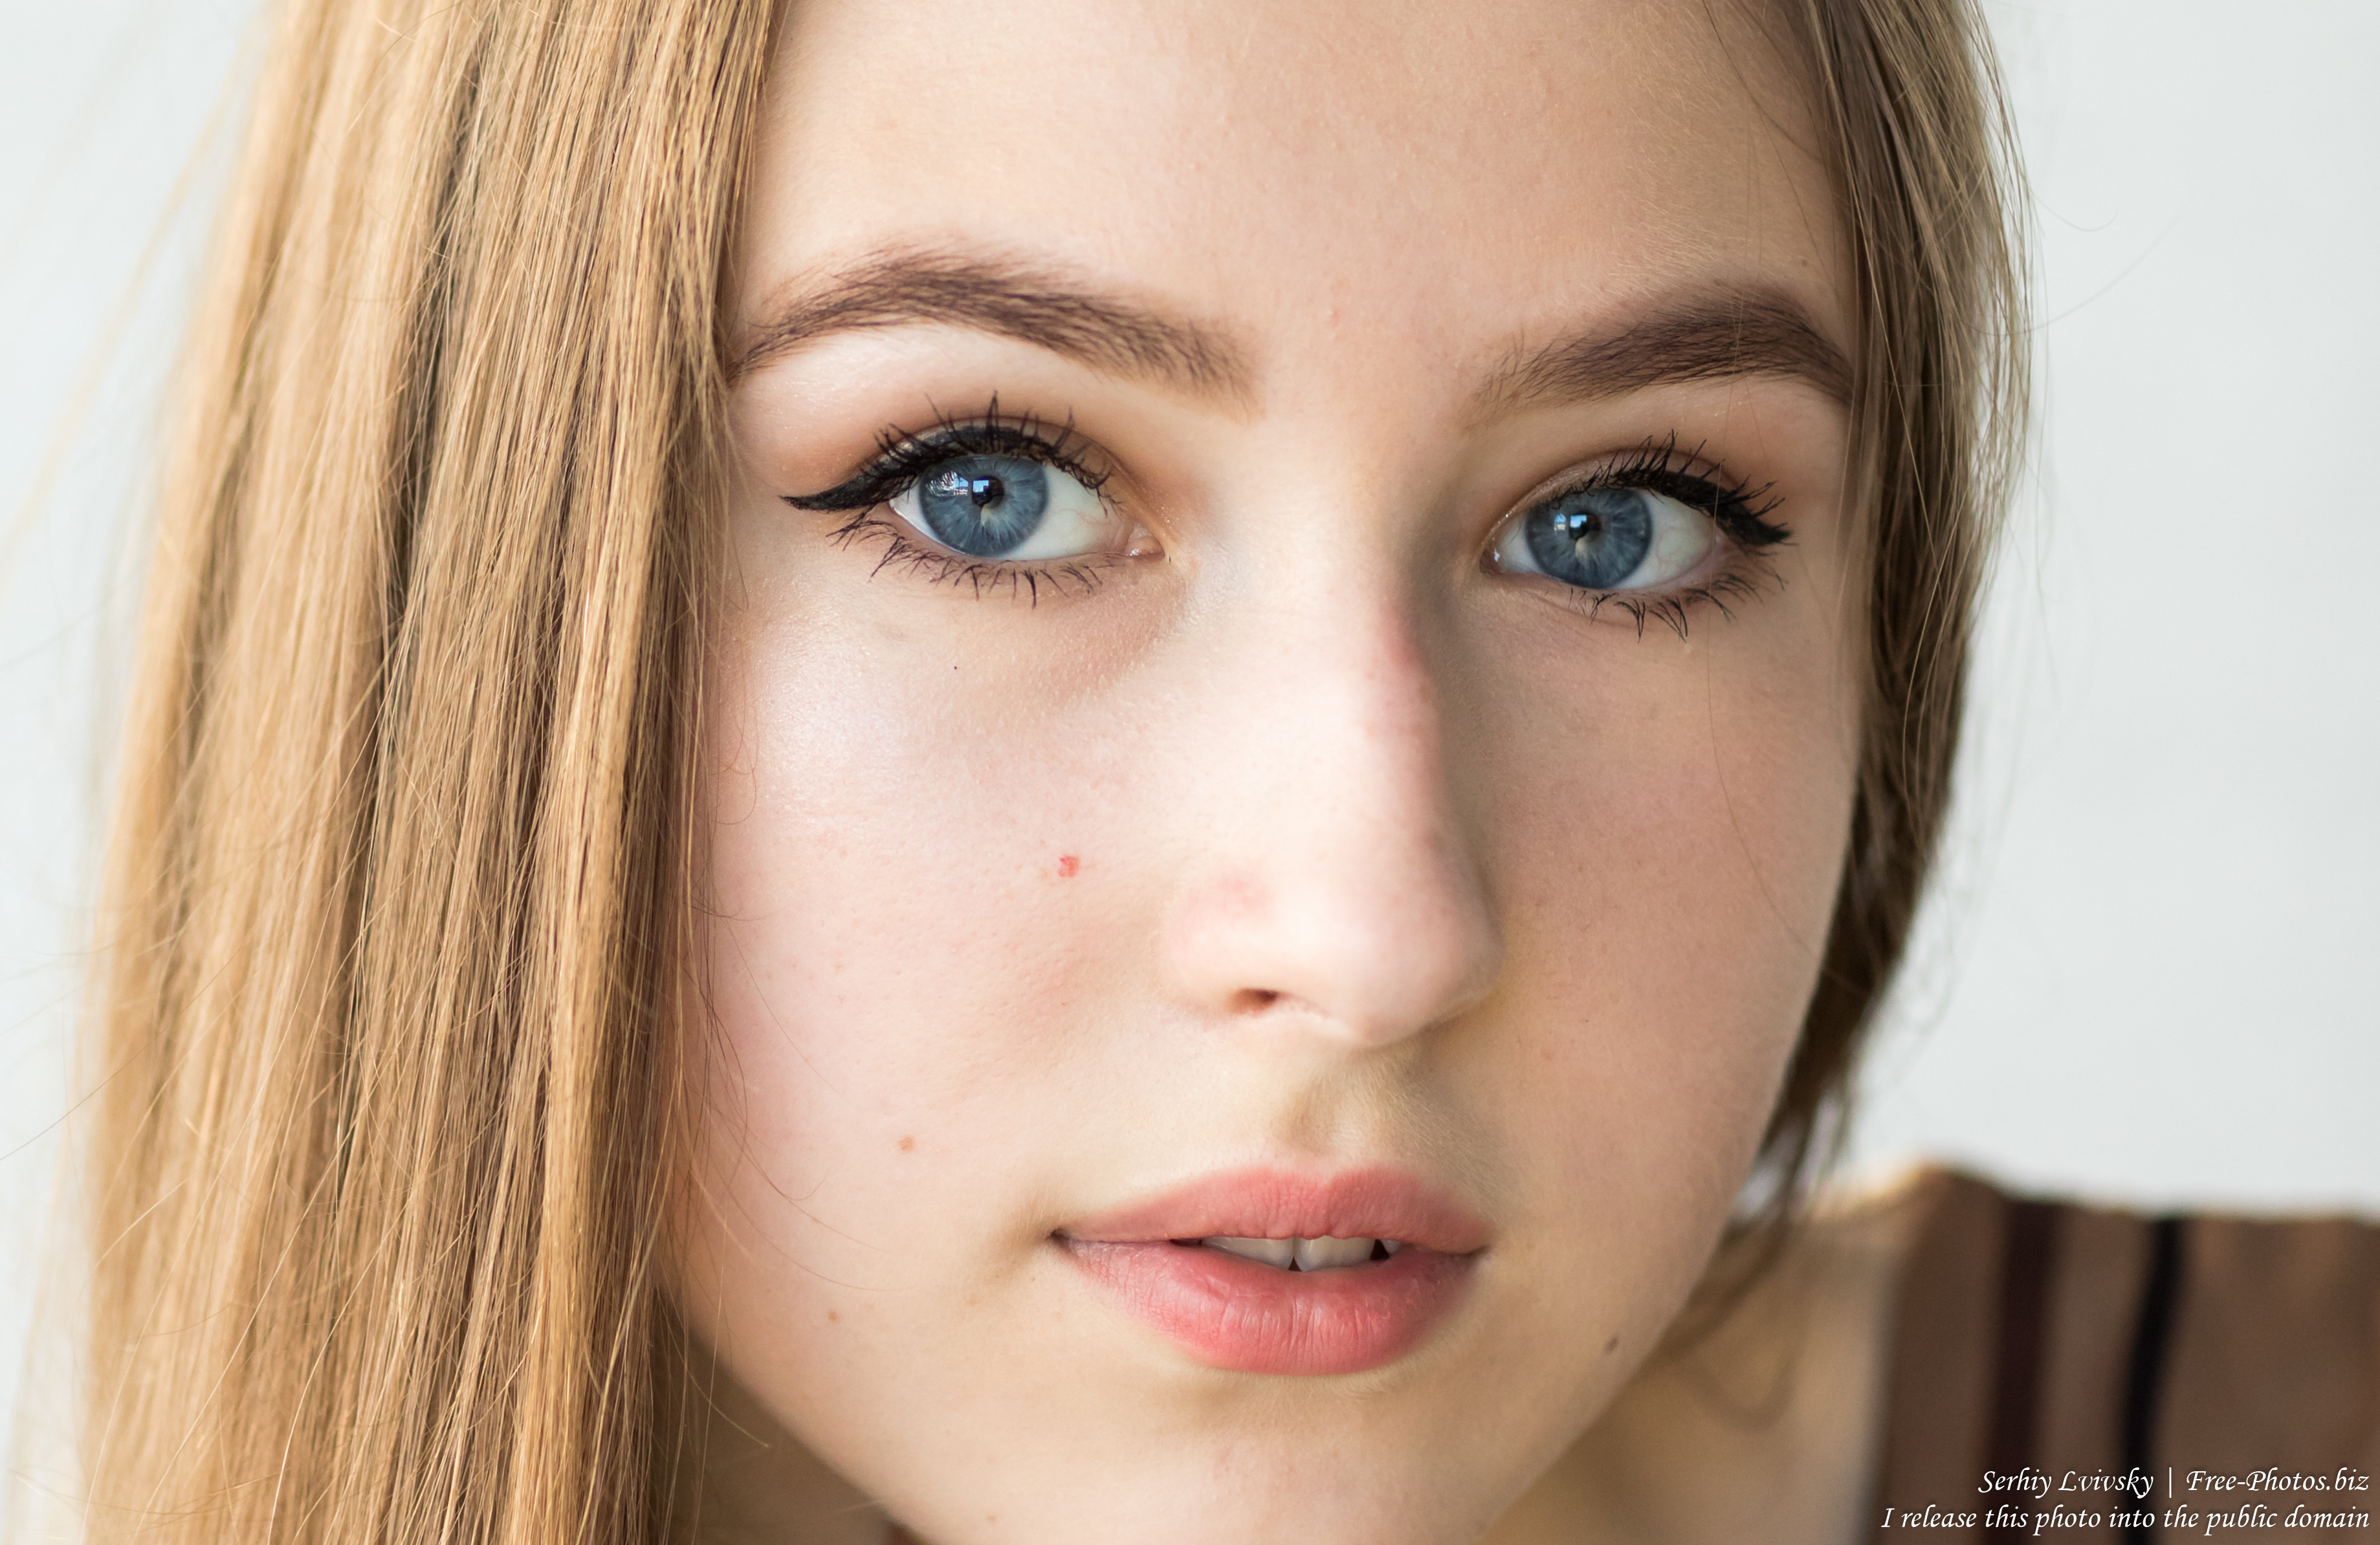 Vika - a 17-year-old girl with blue eyes and natural fair hair photographed in June 2019 by Serhiy Lvivsky, picture 15